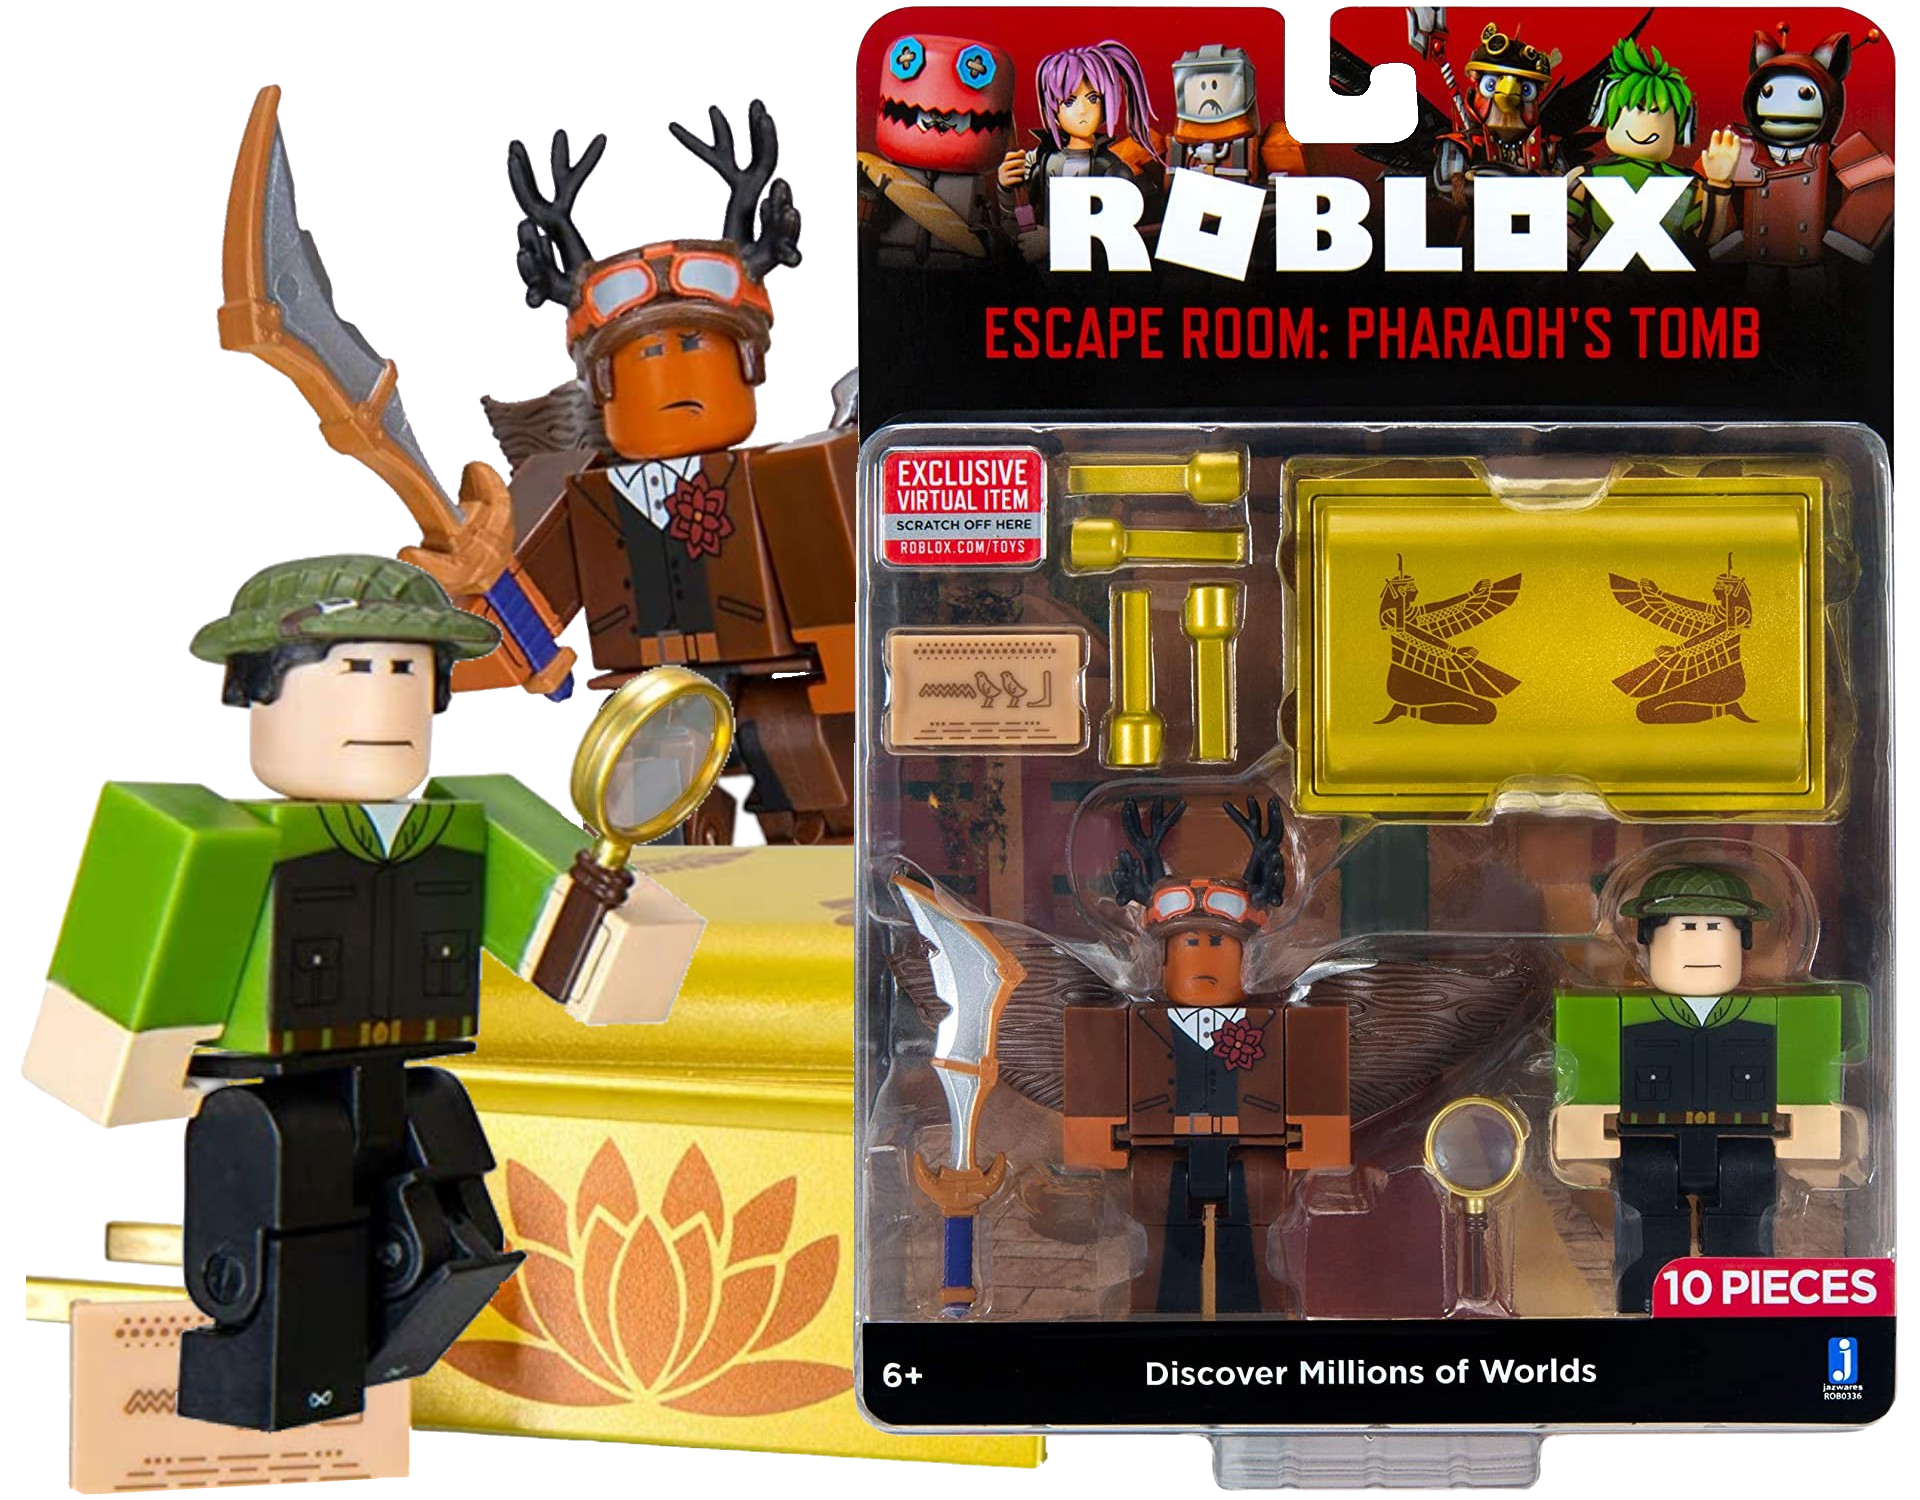 Escaperoom Gg The Ultimate Online Escape Room Experience - robloxcomtoys enter your code